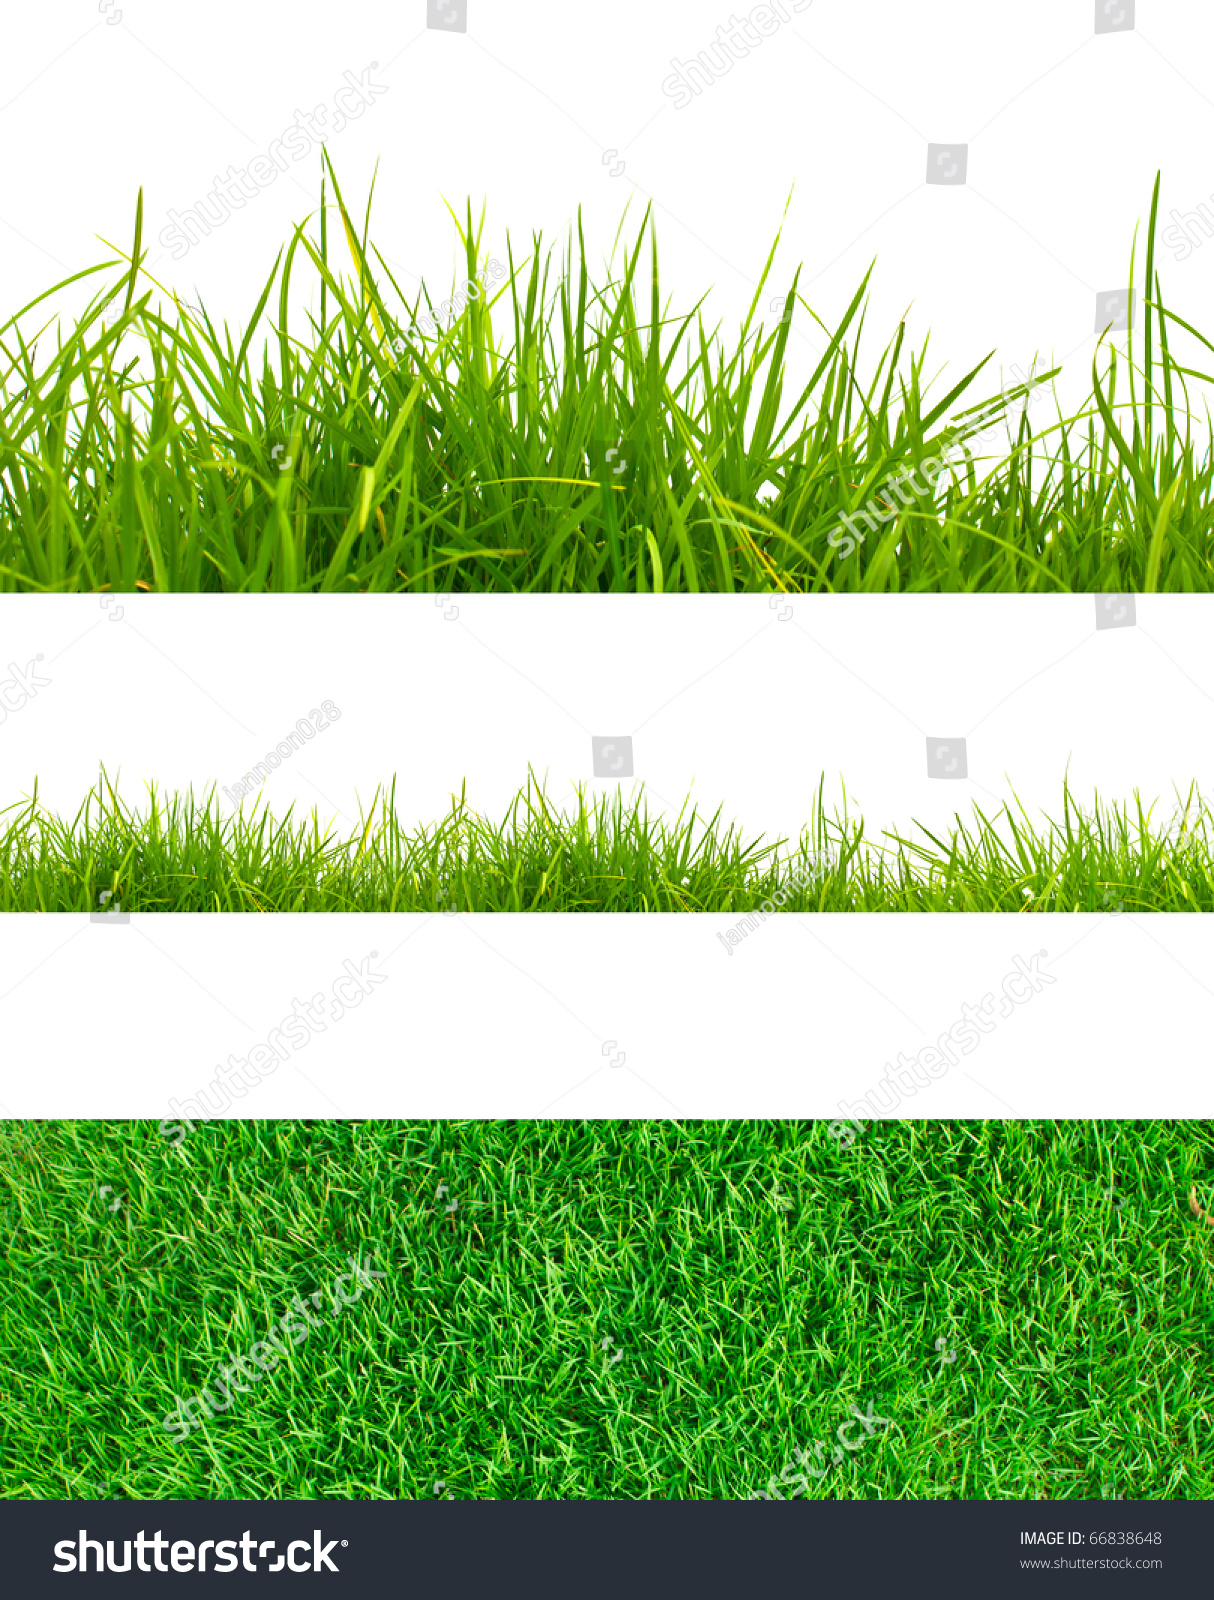 3 Backgrounds Fresh Spring Green Grass Stock Photo ...